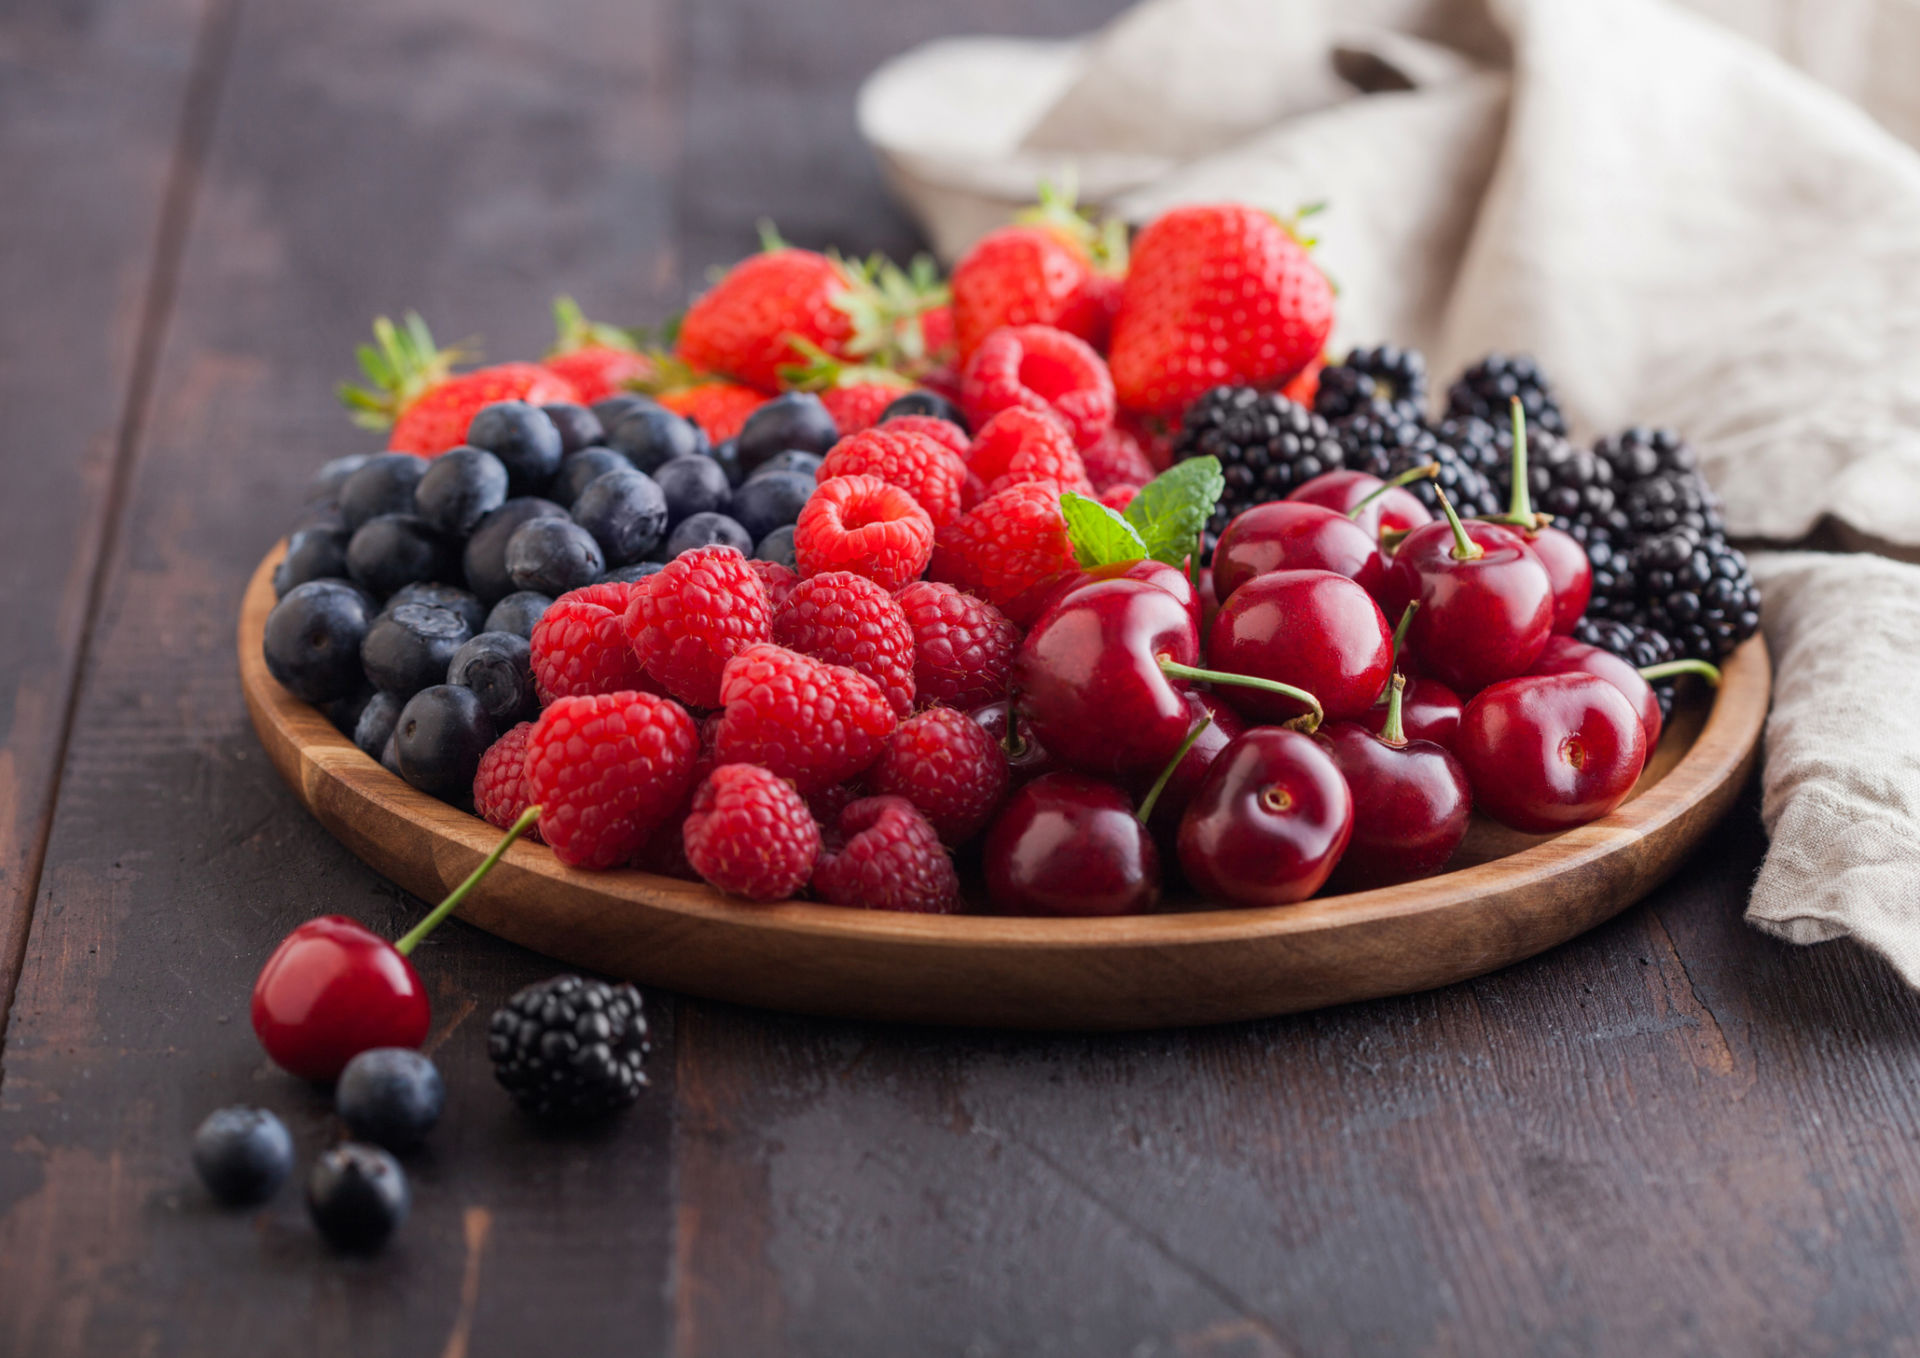 Spring fruits: what are the advantages